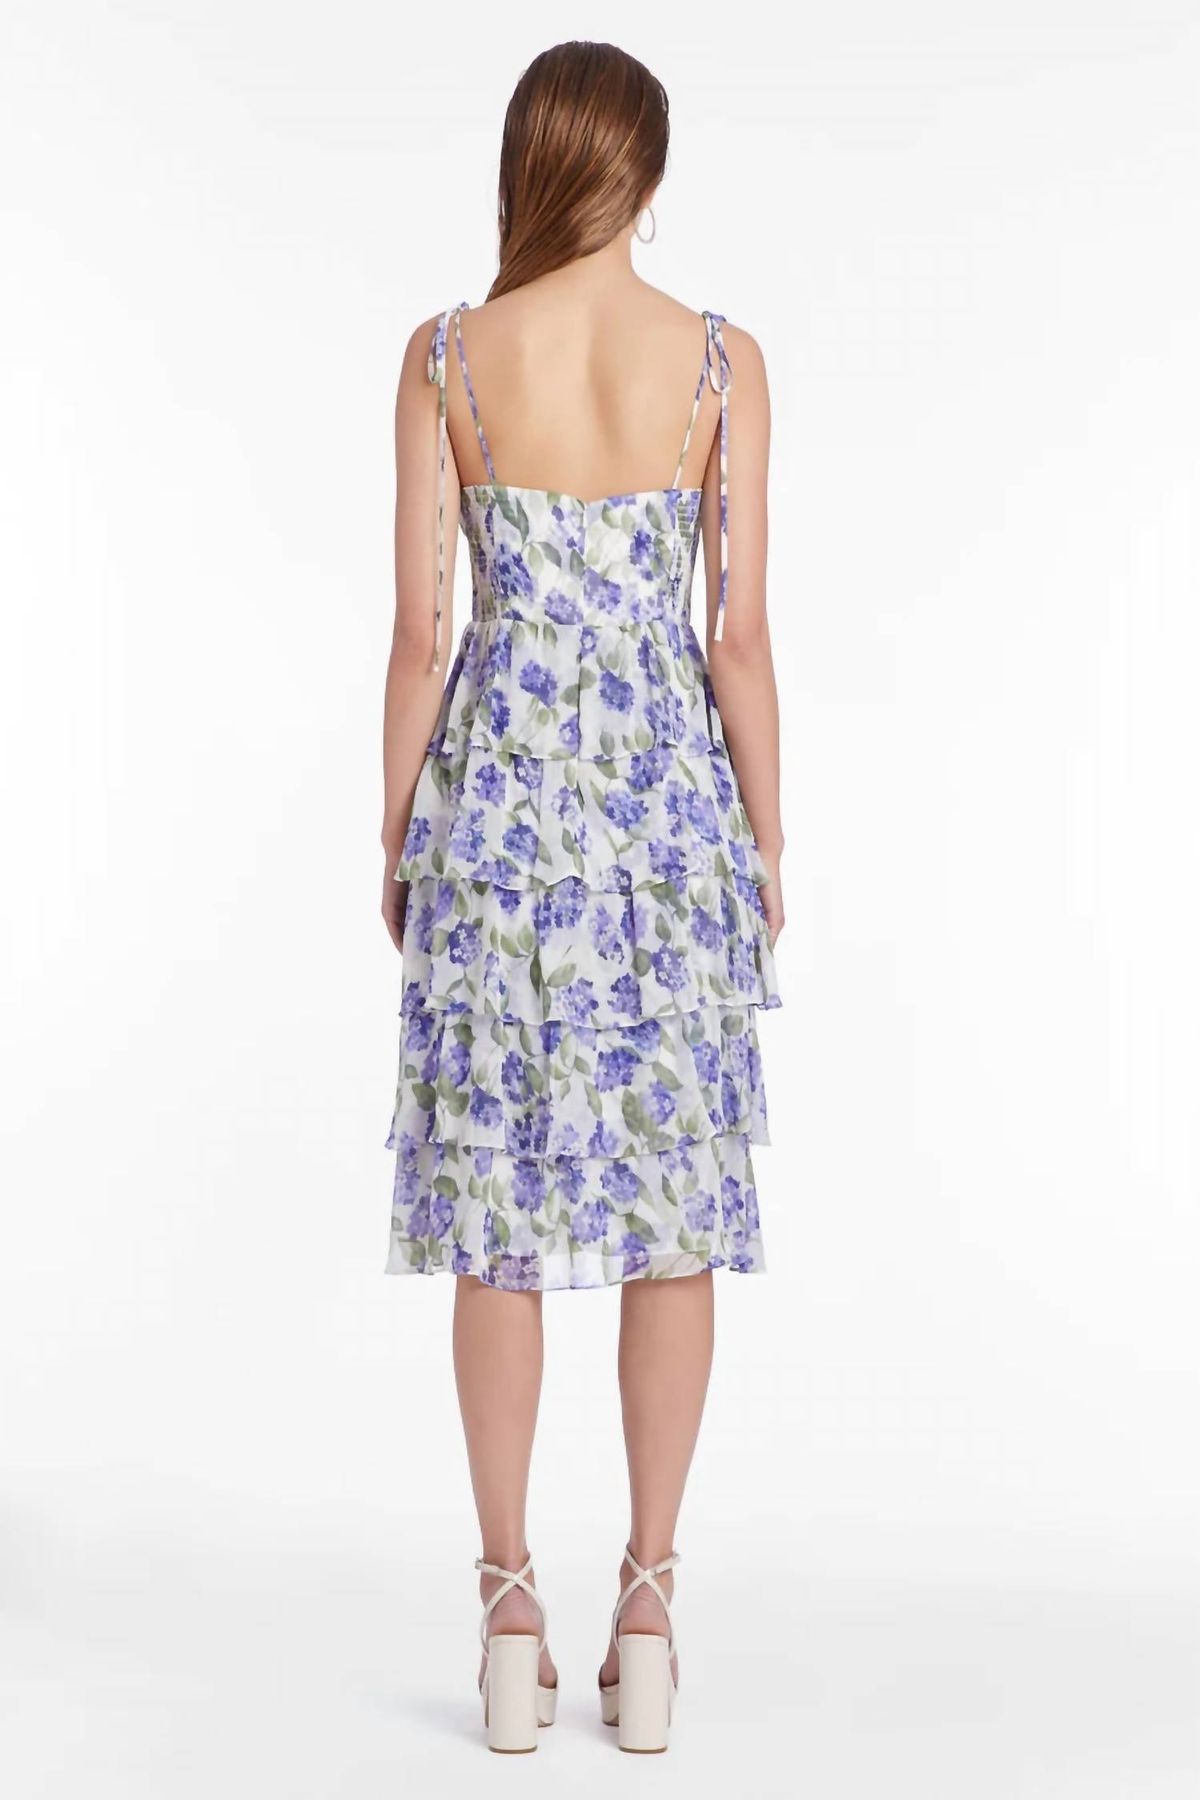 Style 1-389392109-2901 Amanda Uprichard Size M Floral Blue Cocktail Dress on Queenly